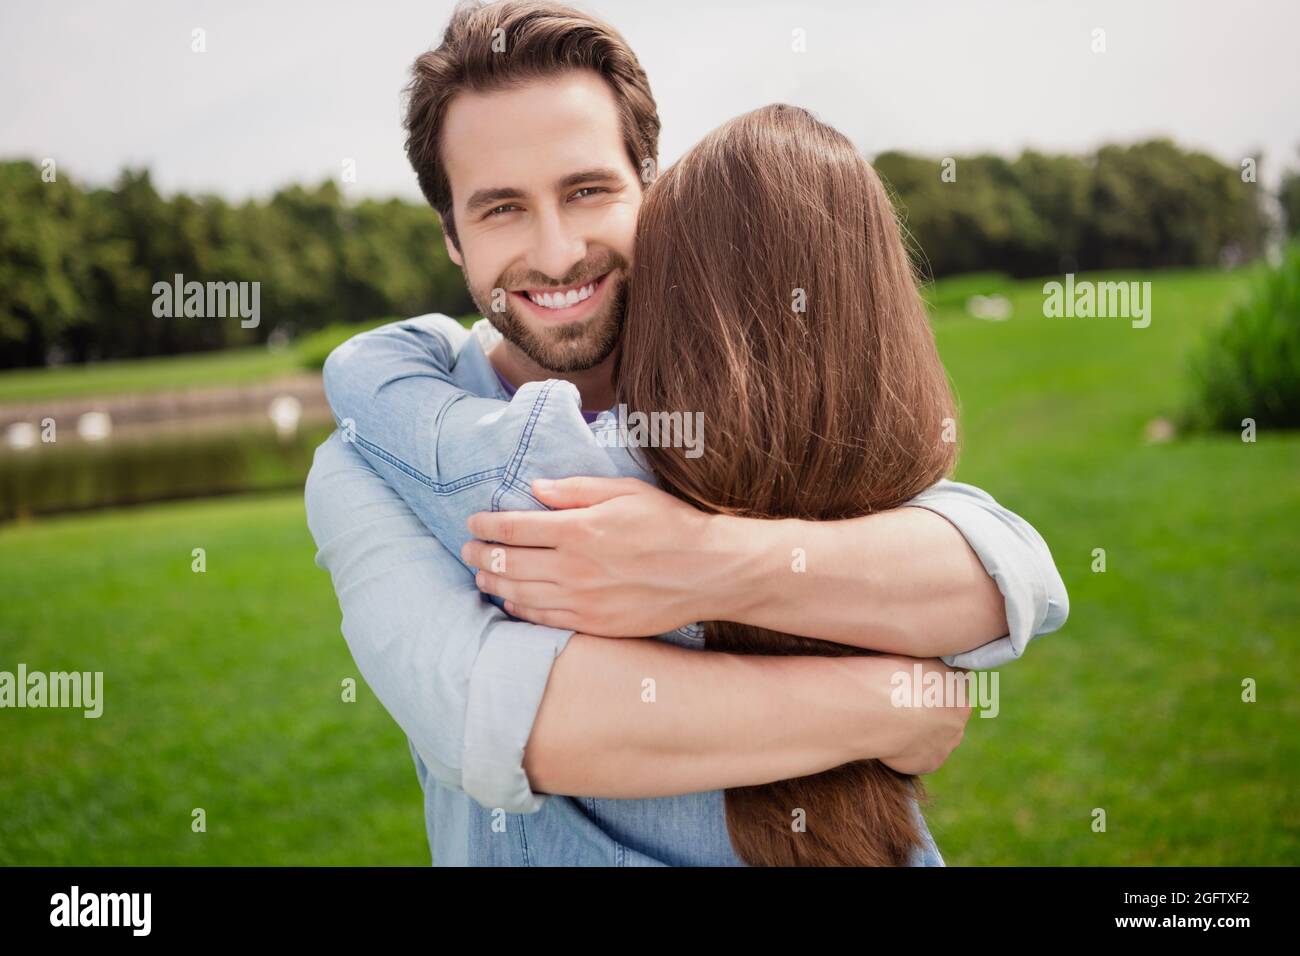 Photo of positive lovely cute beautiful couple hug embrace relaxing outdoors husband cuddle wife romantic date Stock Photo